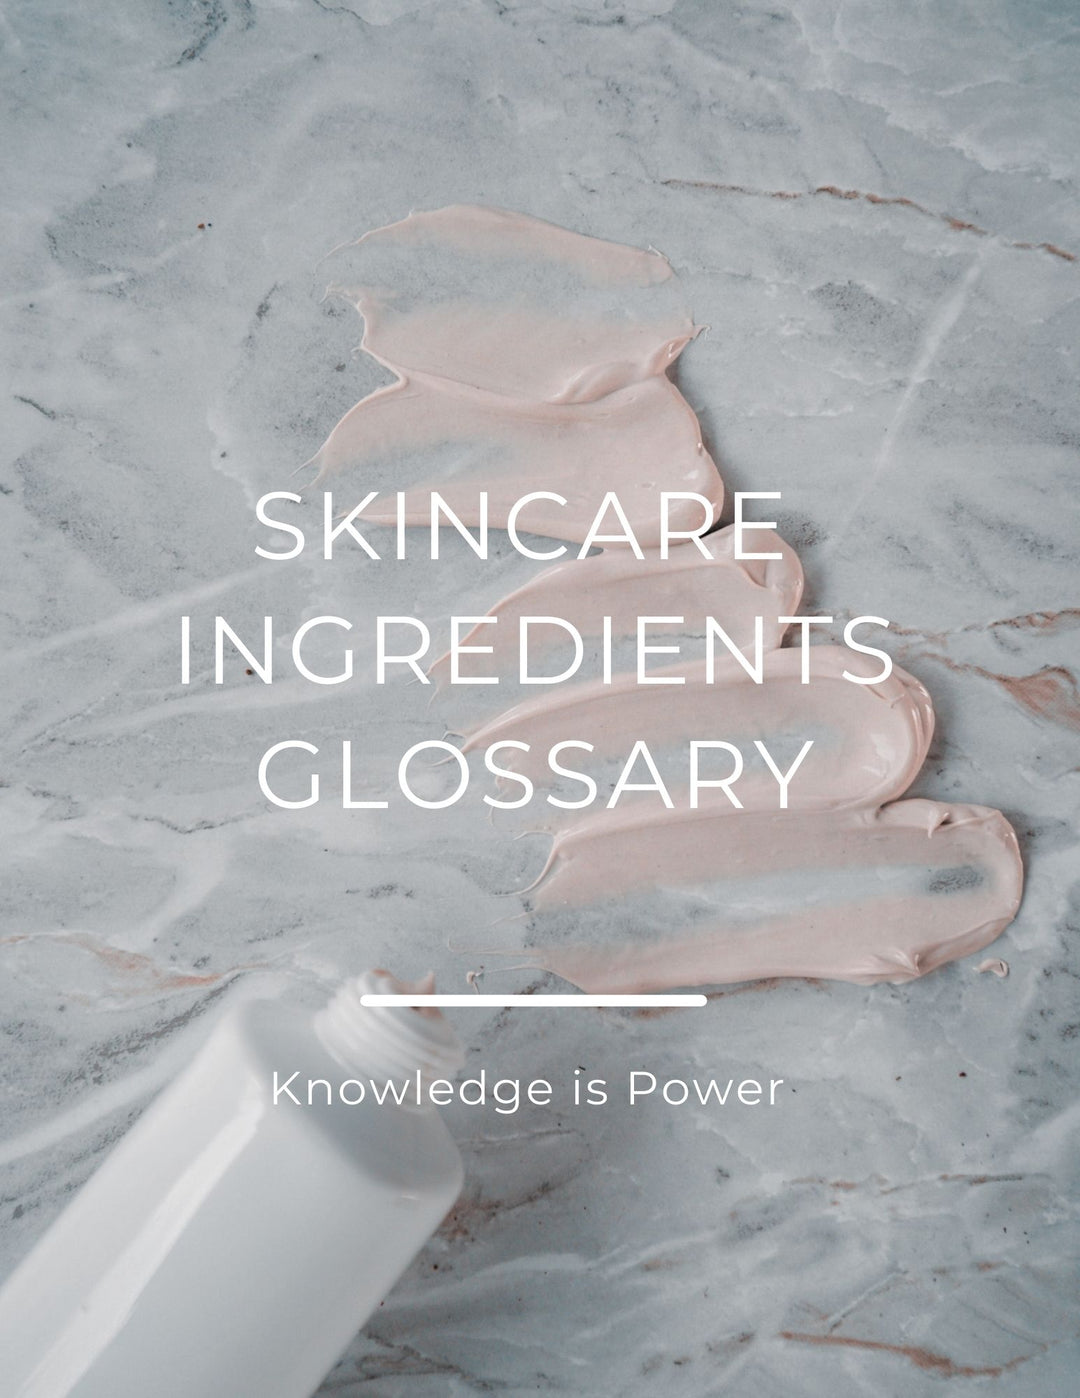 Skincare Ingredients Glossary